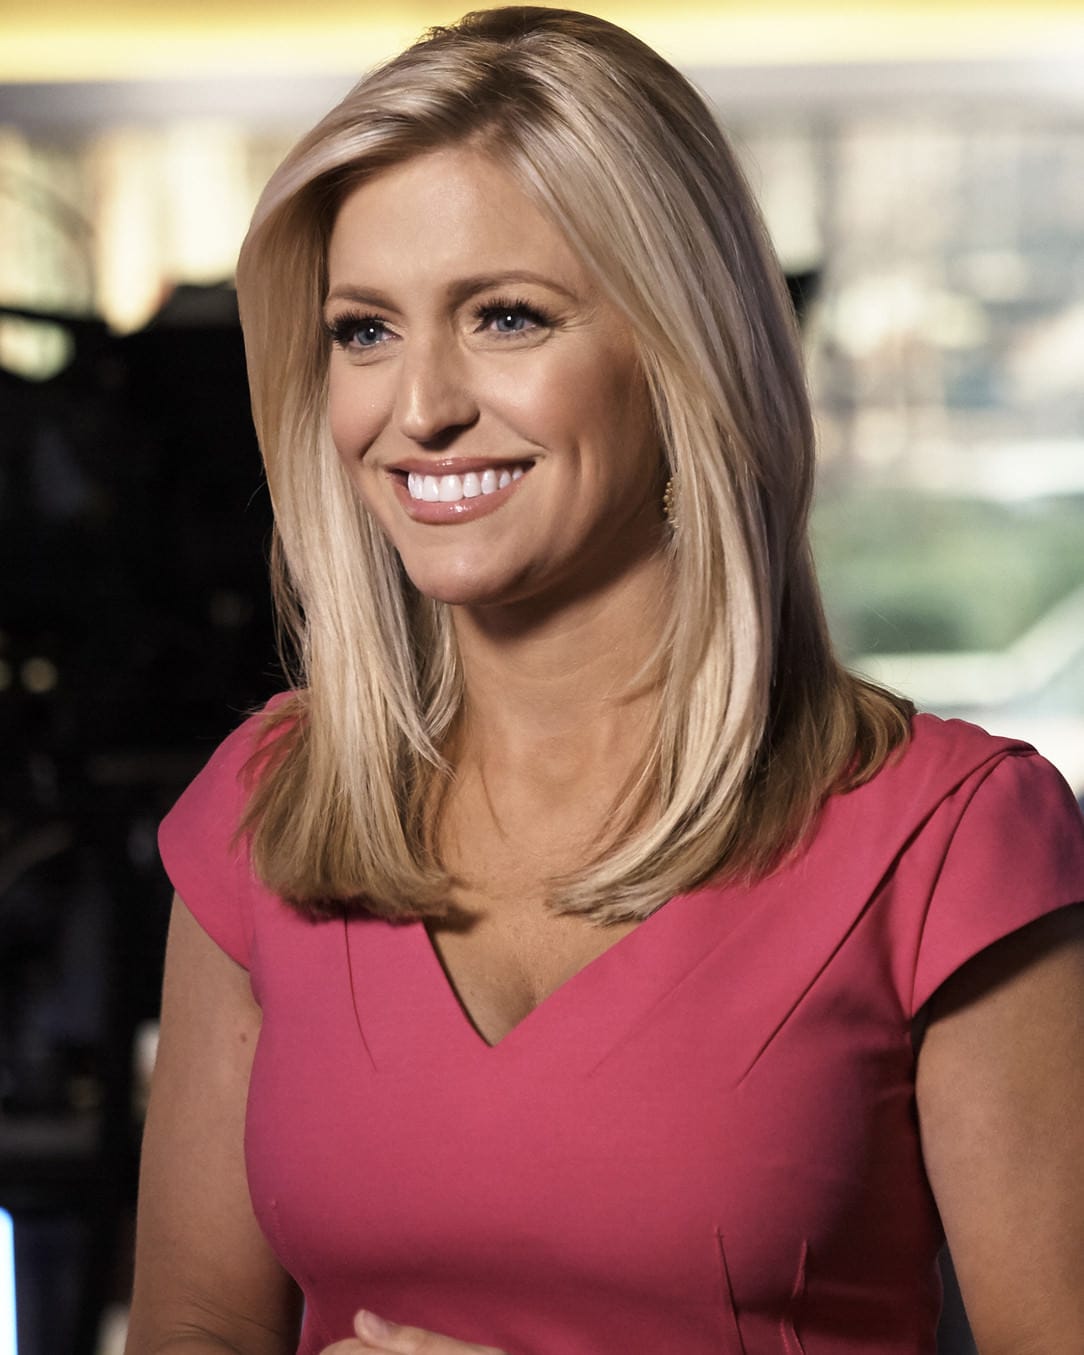 Ainsley earhardt images